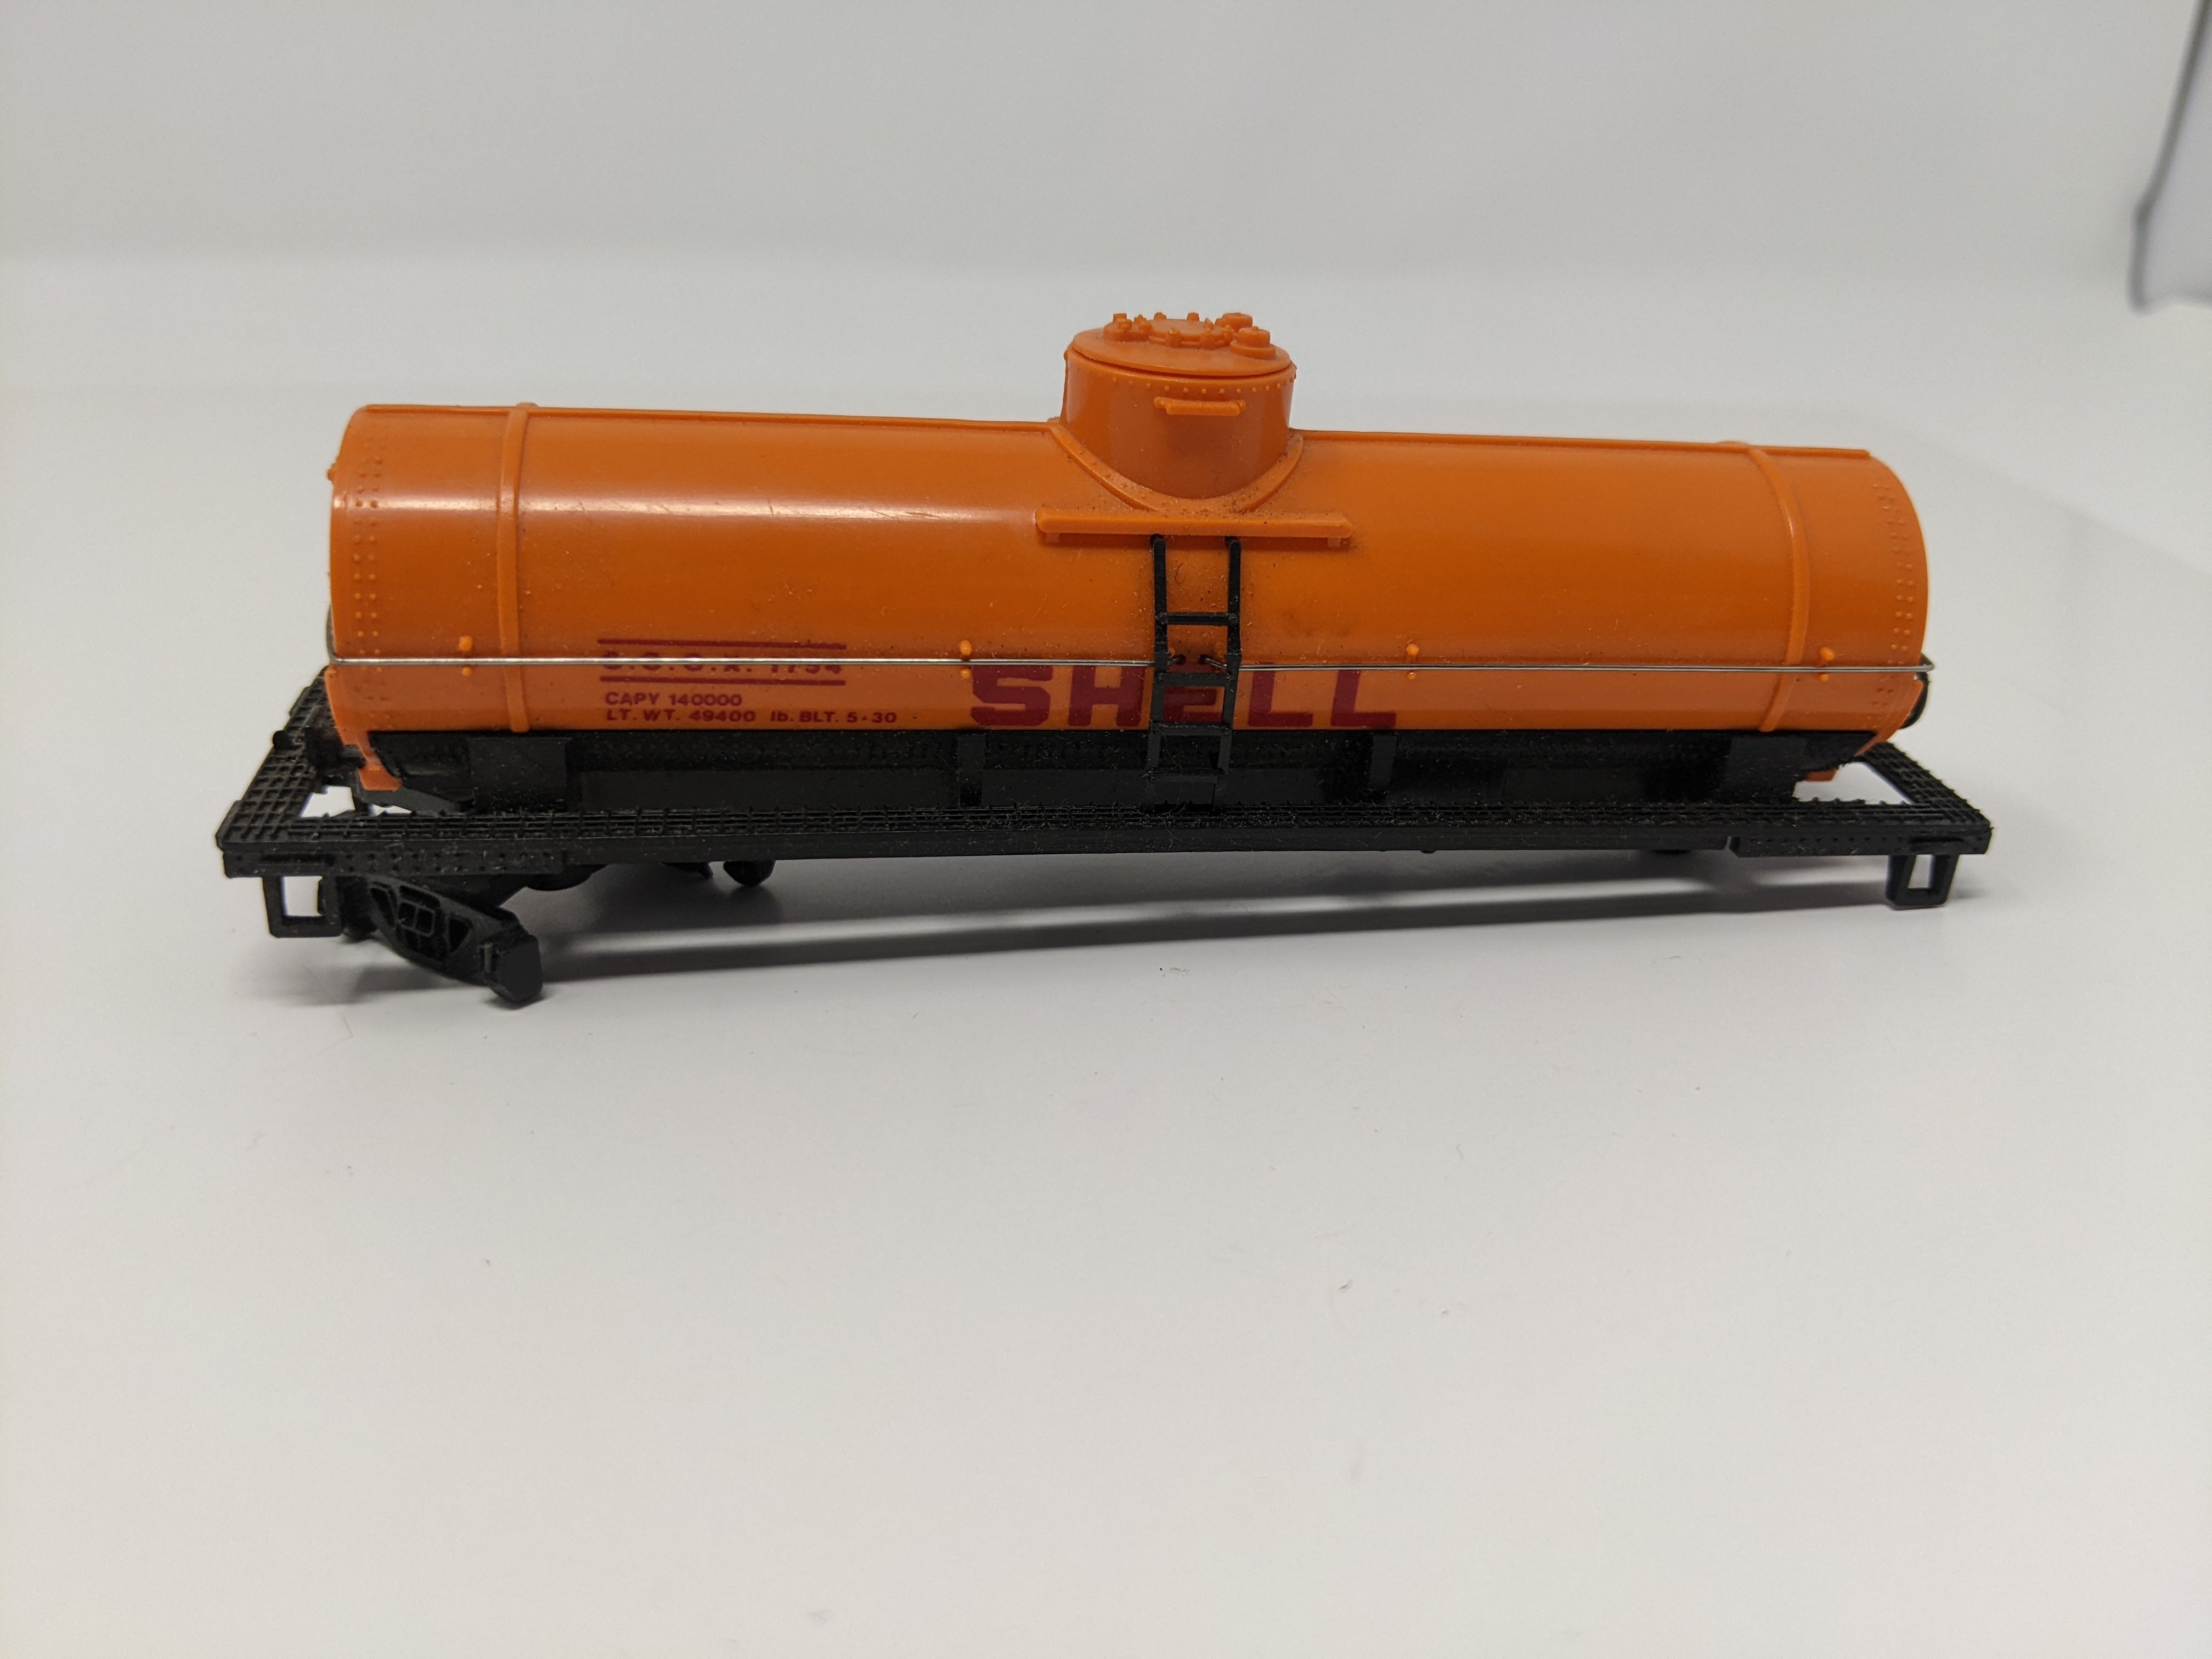 USED Bachmann HO Scale, Single Dome Tank Car (for parts or repairs), Shell SCCX #1754, Read Description